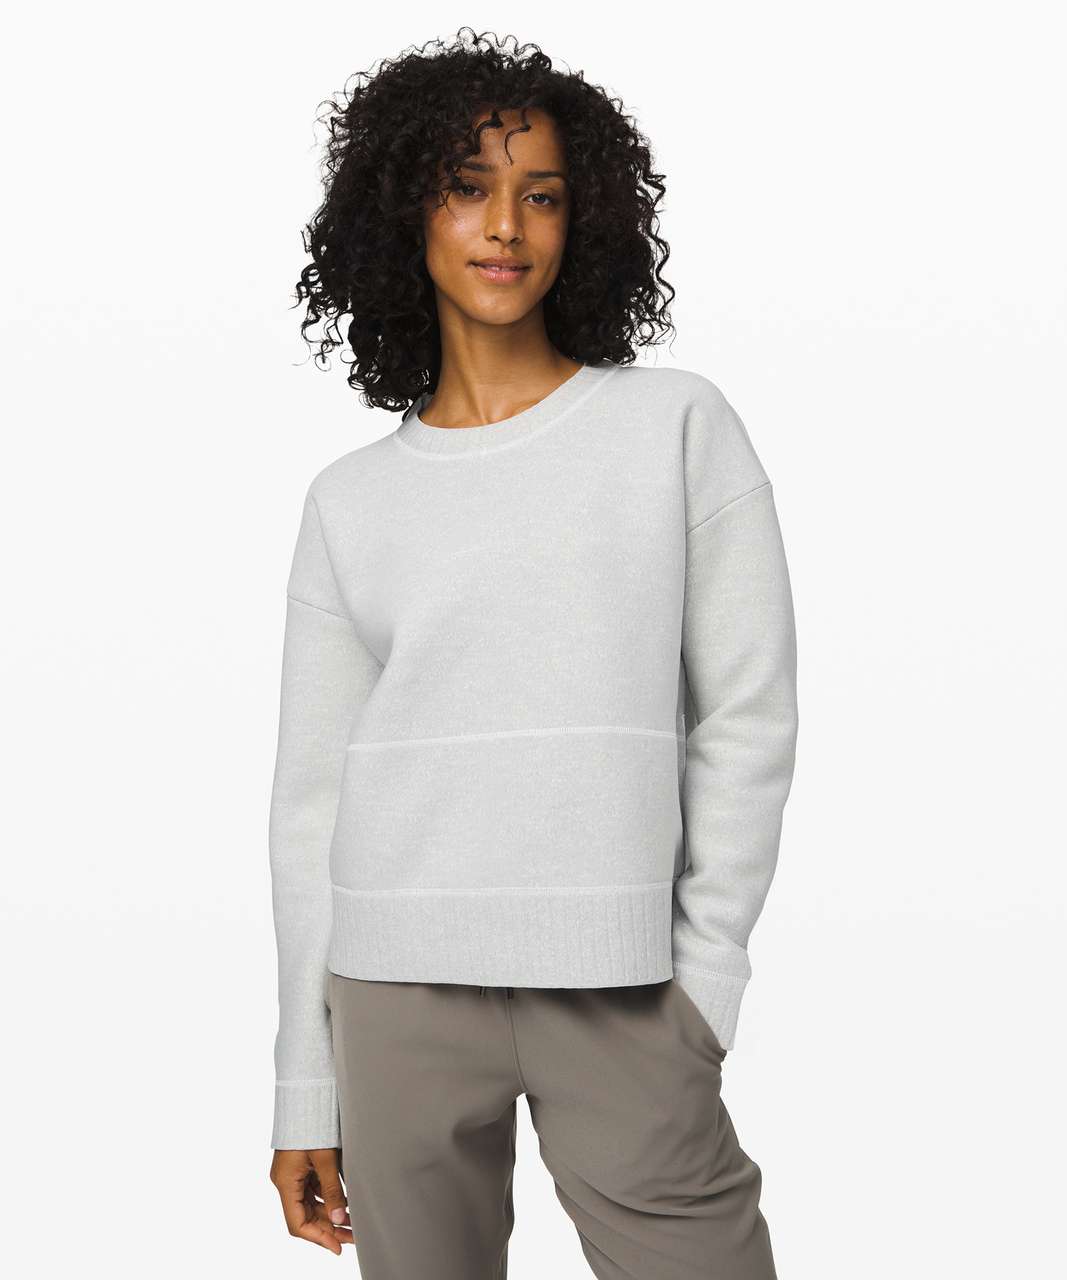 Lululemon All Afternoon Sweater - Heathered Speckled Black / White ...